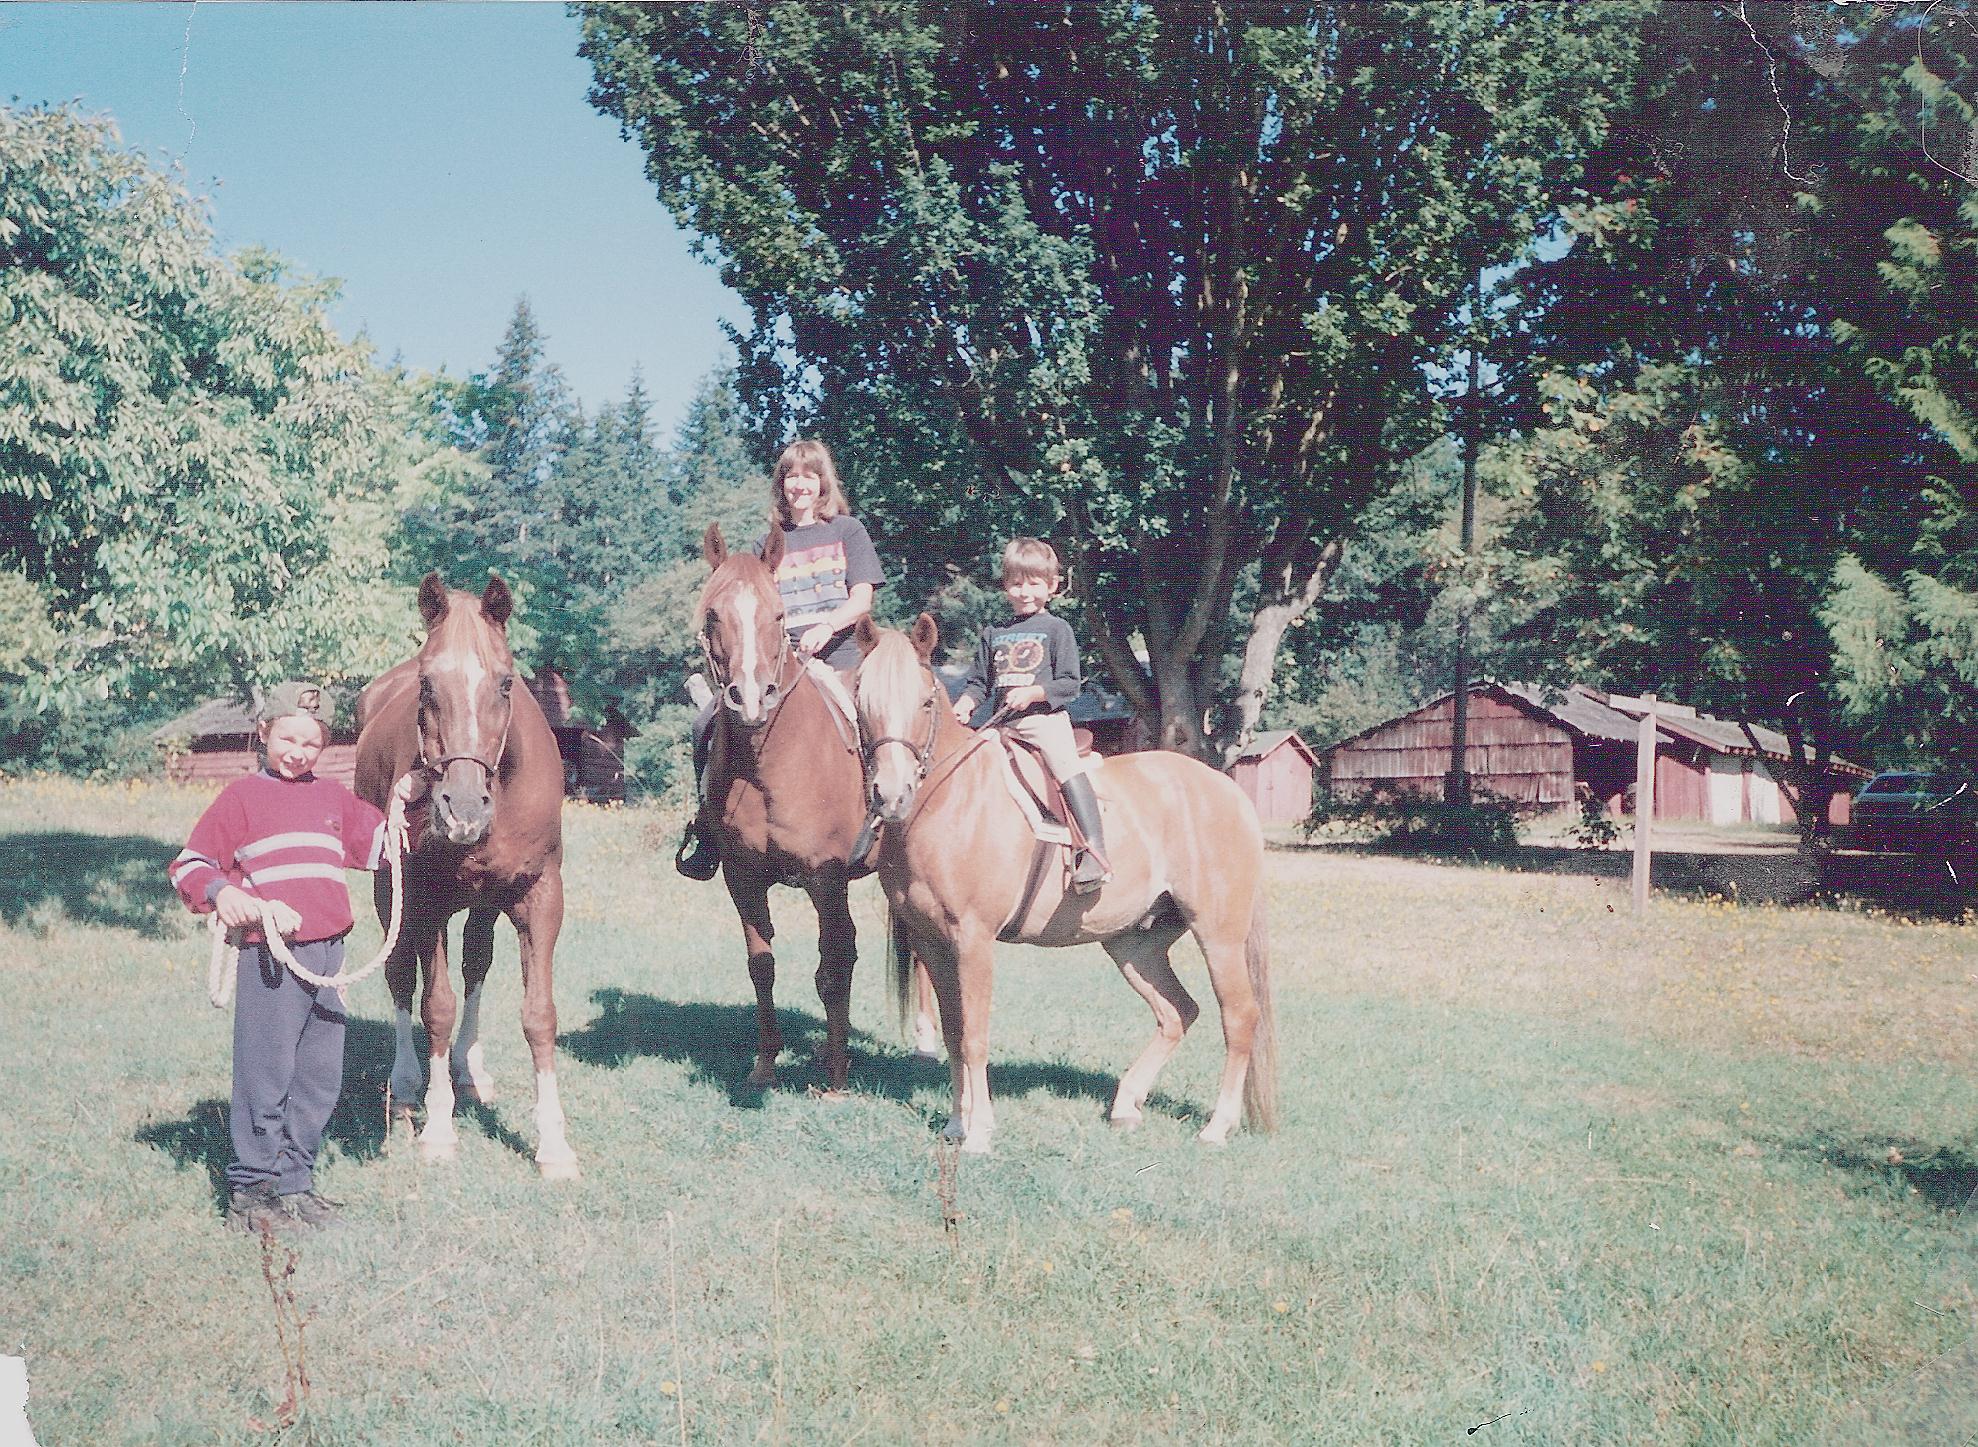 Historical Photo of the co-founders of Headley Holistics with their horses many years ago before they launched their new family owned small buisness Headley Holistics and their own product line Evolved Remedies